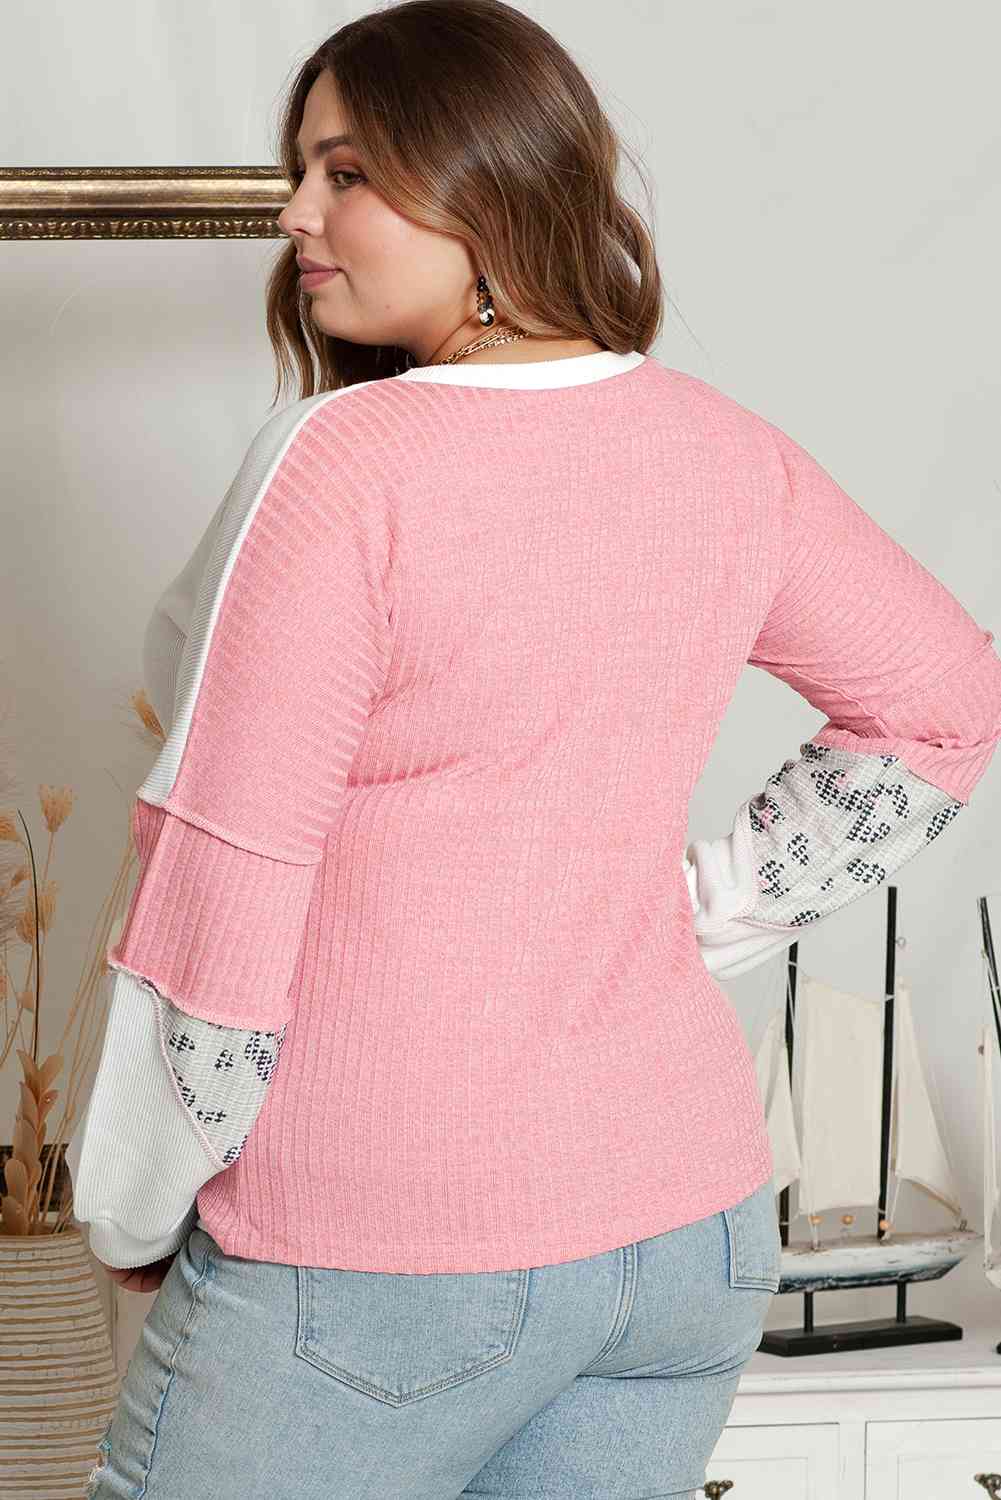 Plus Size Out Seamed Splicing Sweatshirt